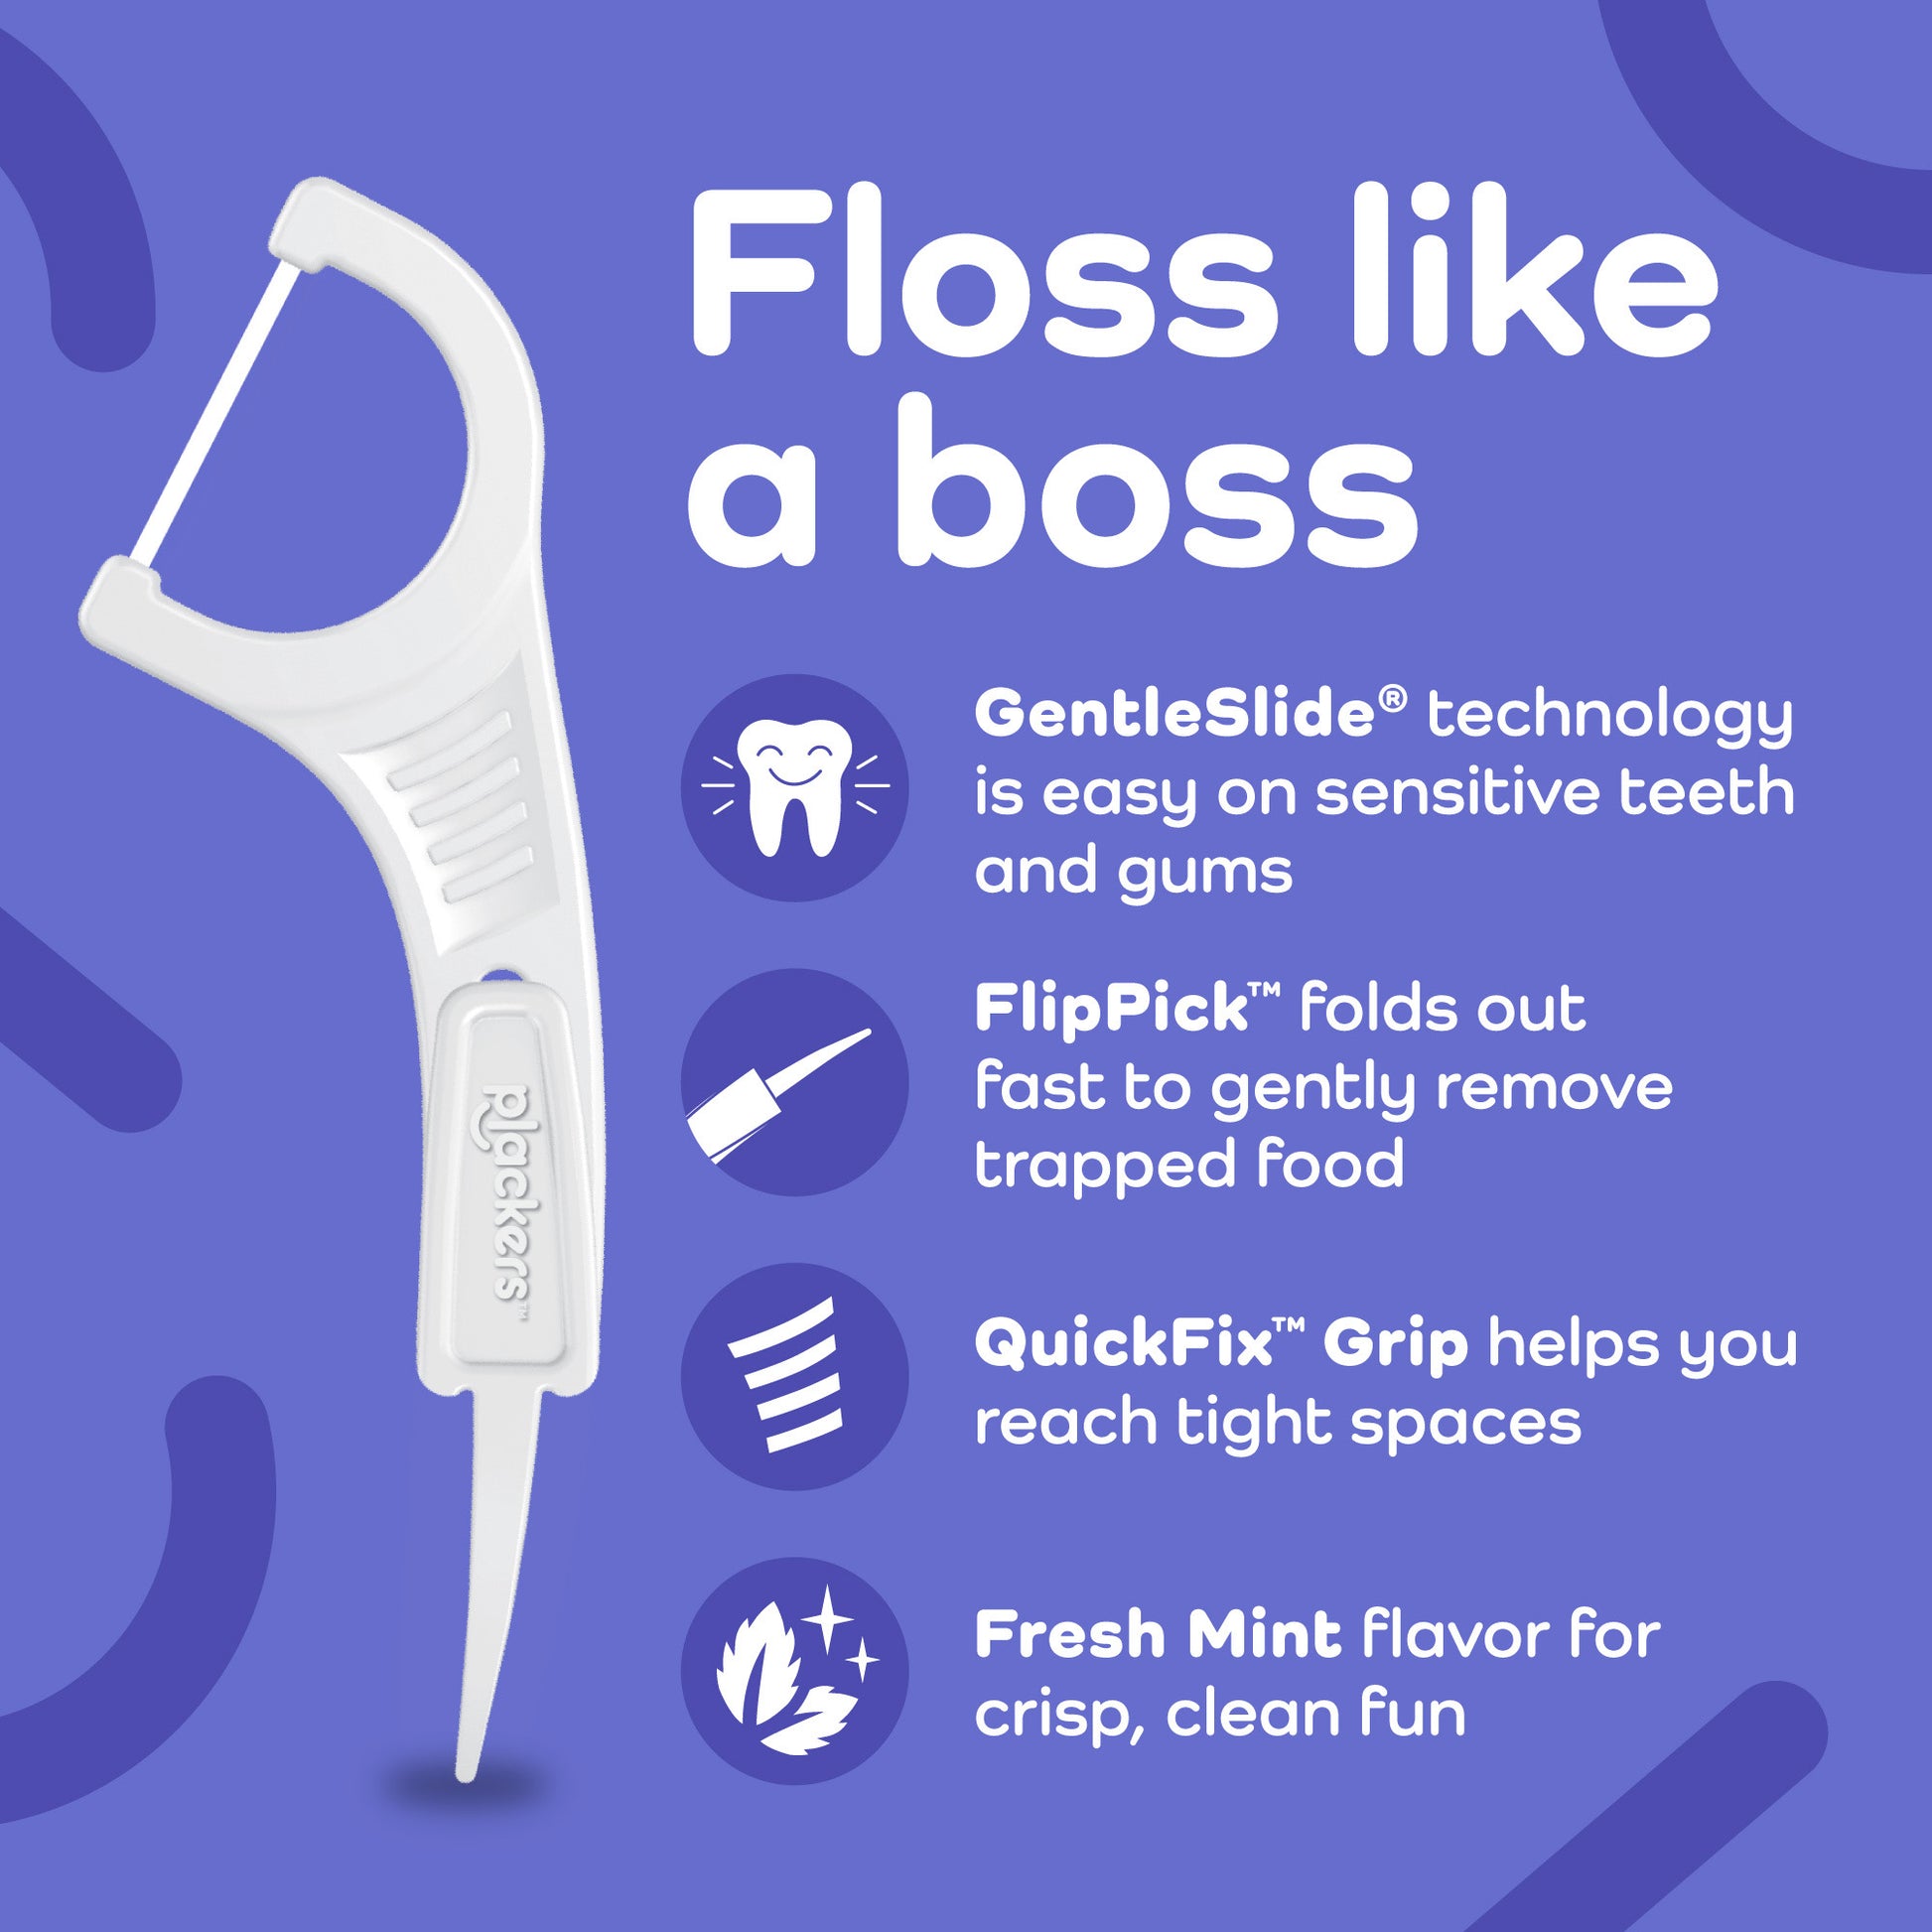 Floss like a boss. Gentleslide technology is easy on sensitive teeth and gums. FlipPick folds out fast to gently remove trapped food. QuickFix Grip helps you reach tight spaces. Fresh Mint flavor for crisp, clean fun